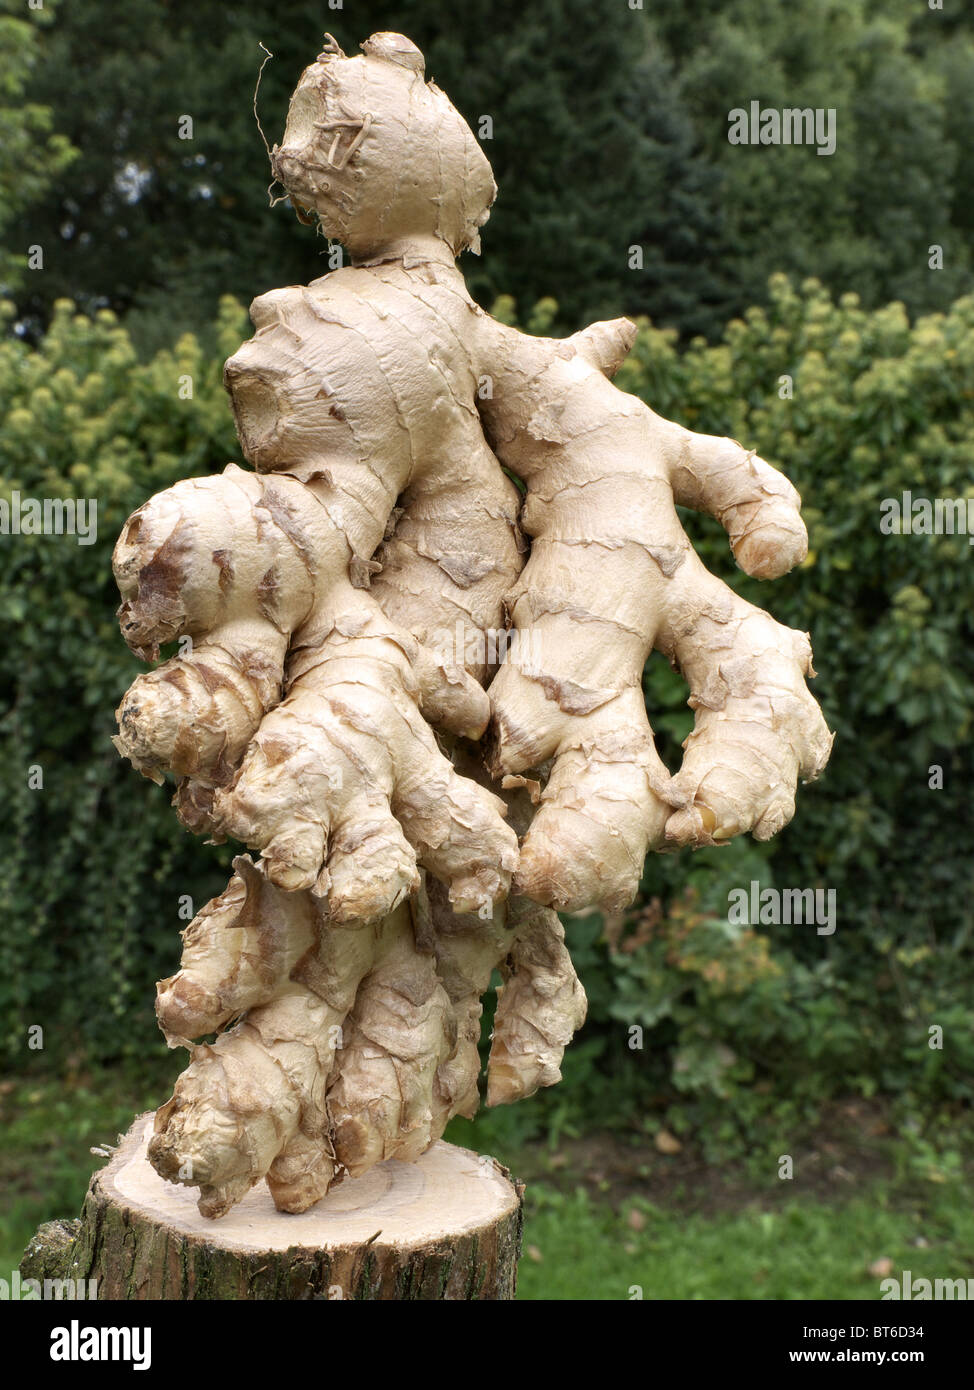 Ginger root looking like a sculpture Stock Photo